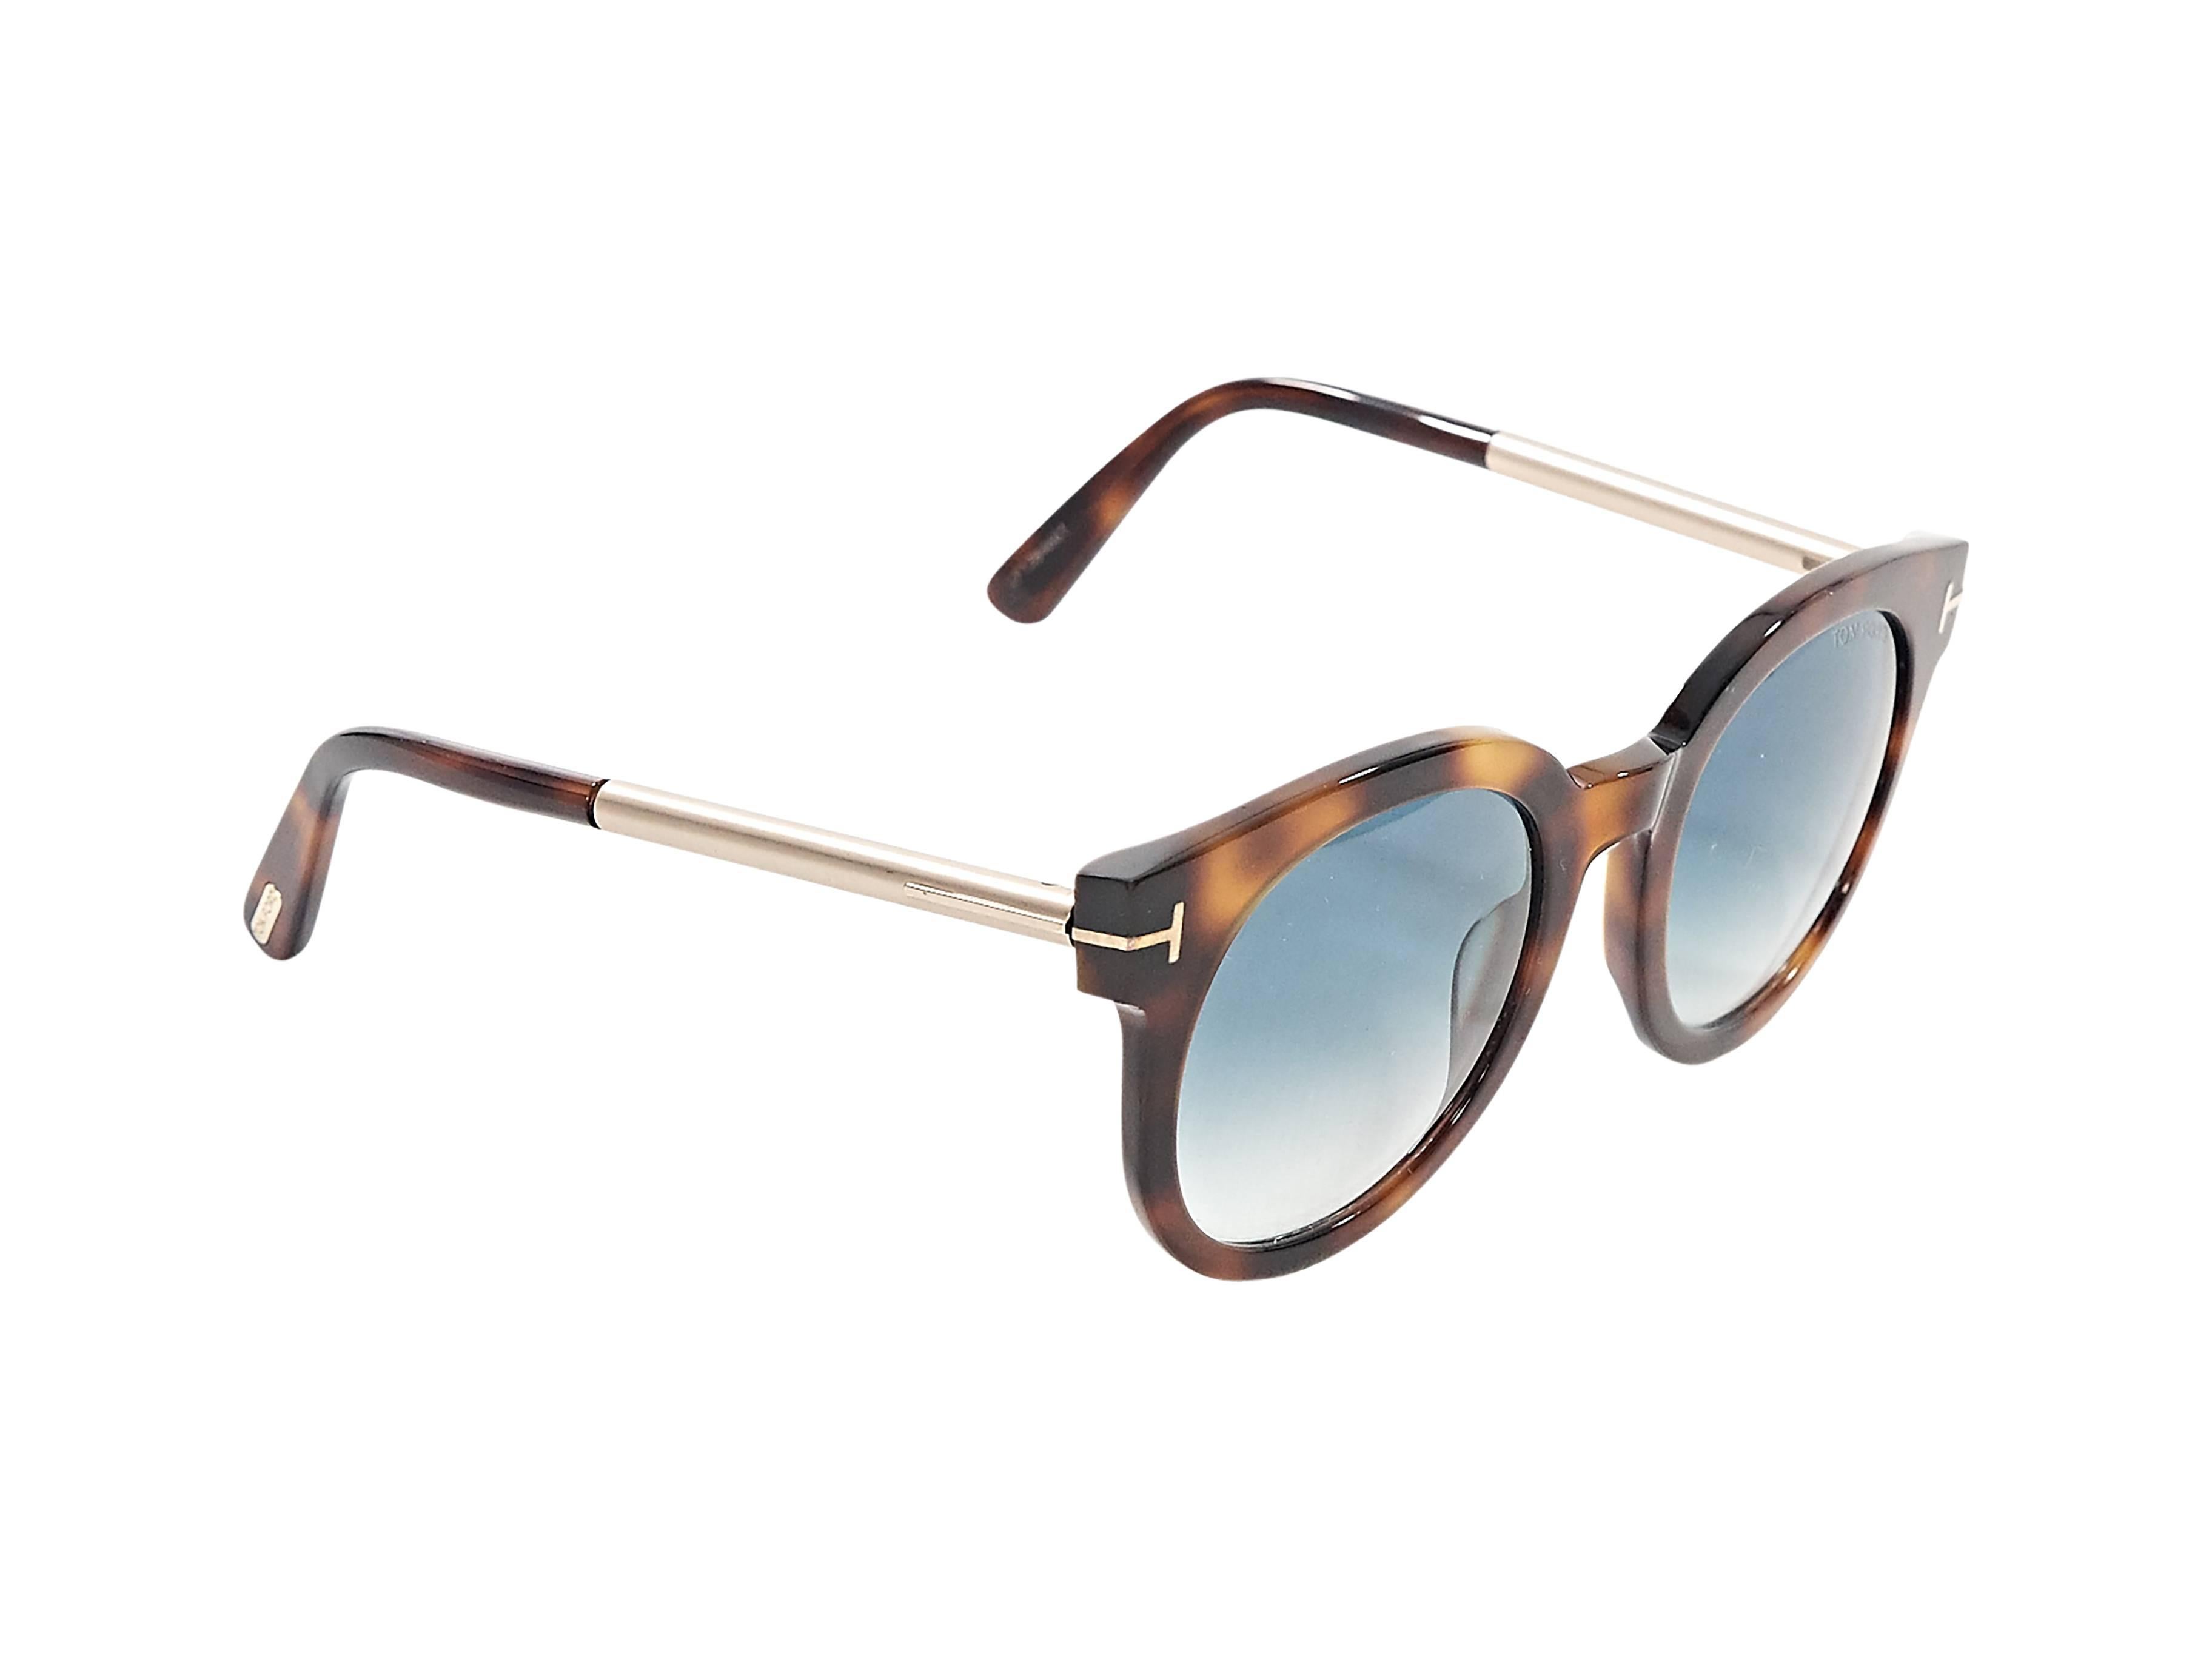 Product details:  ﻿Round tortoiseshell Janina sunglasses by Tom ford.  Gradient lenses. Current 2016 collection.
Condition: Excellent. Includes original tags and case.